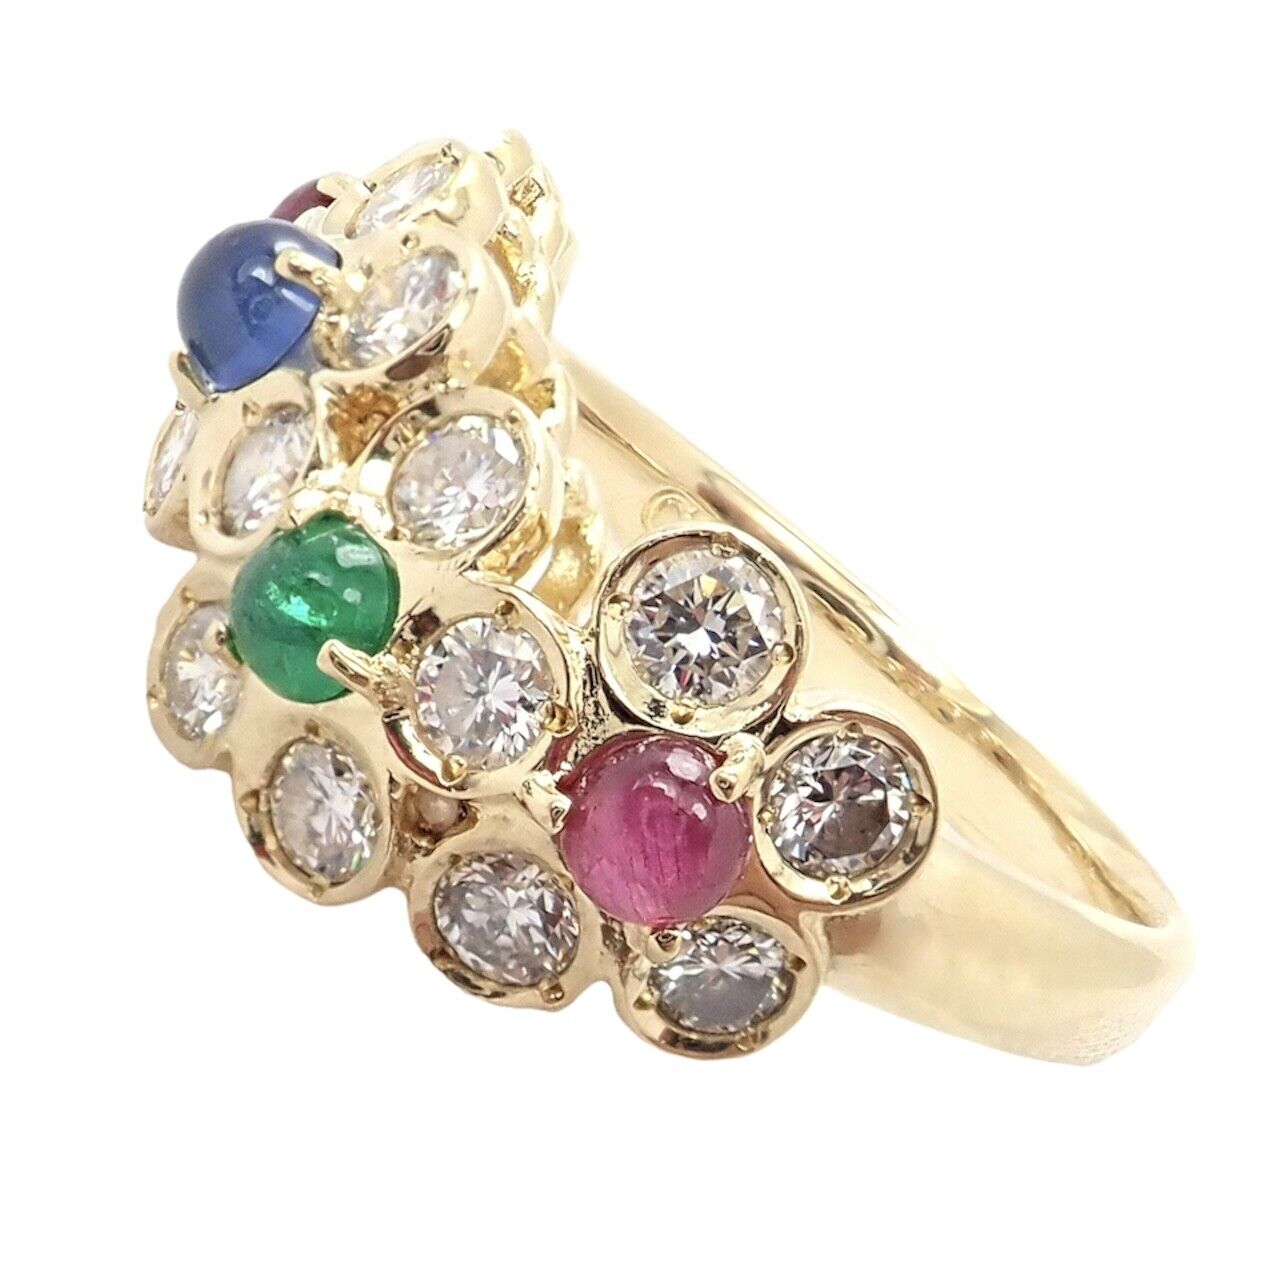 Christian Dior Jewelry & Watches:Fine Jewelry:Rings Rare! Authentic Christian Dior 18k Yellow Gold Ruby Emerald Diamond Flower Ring